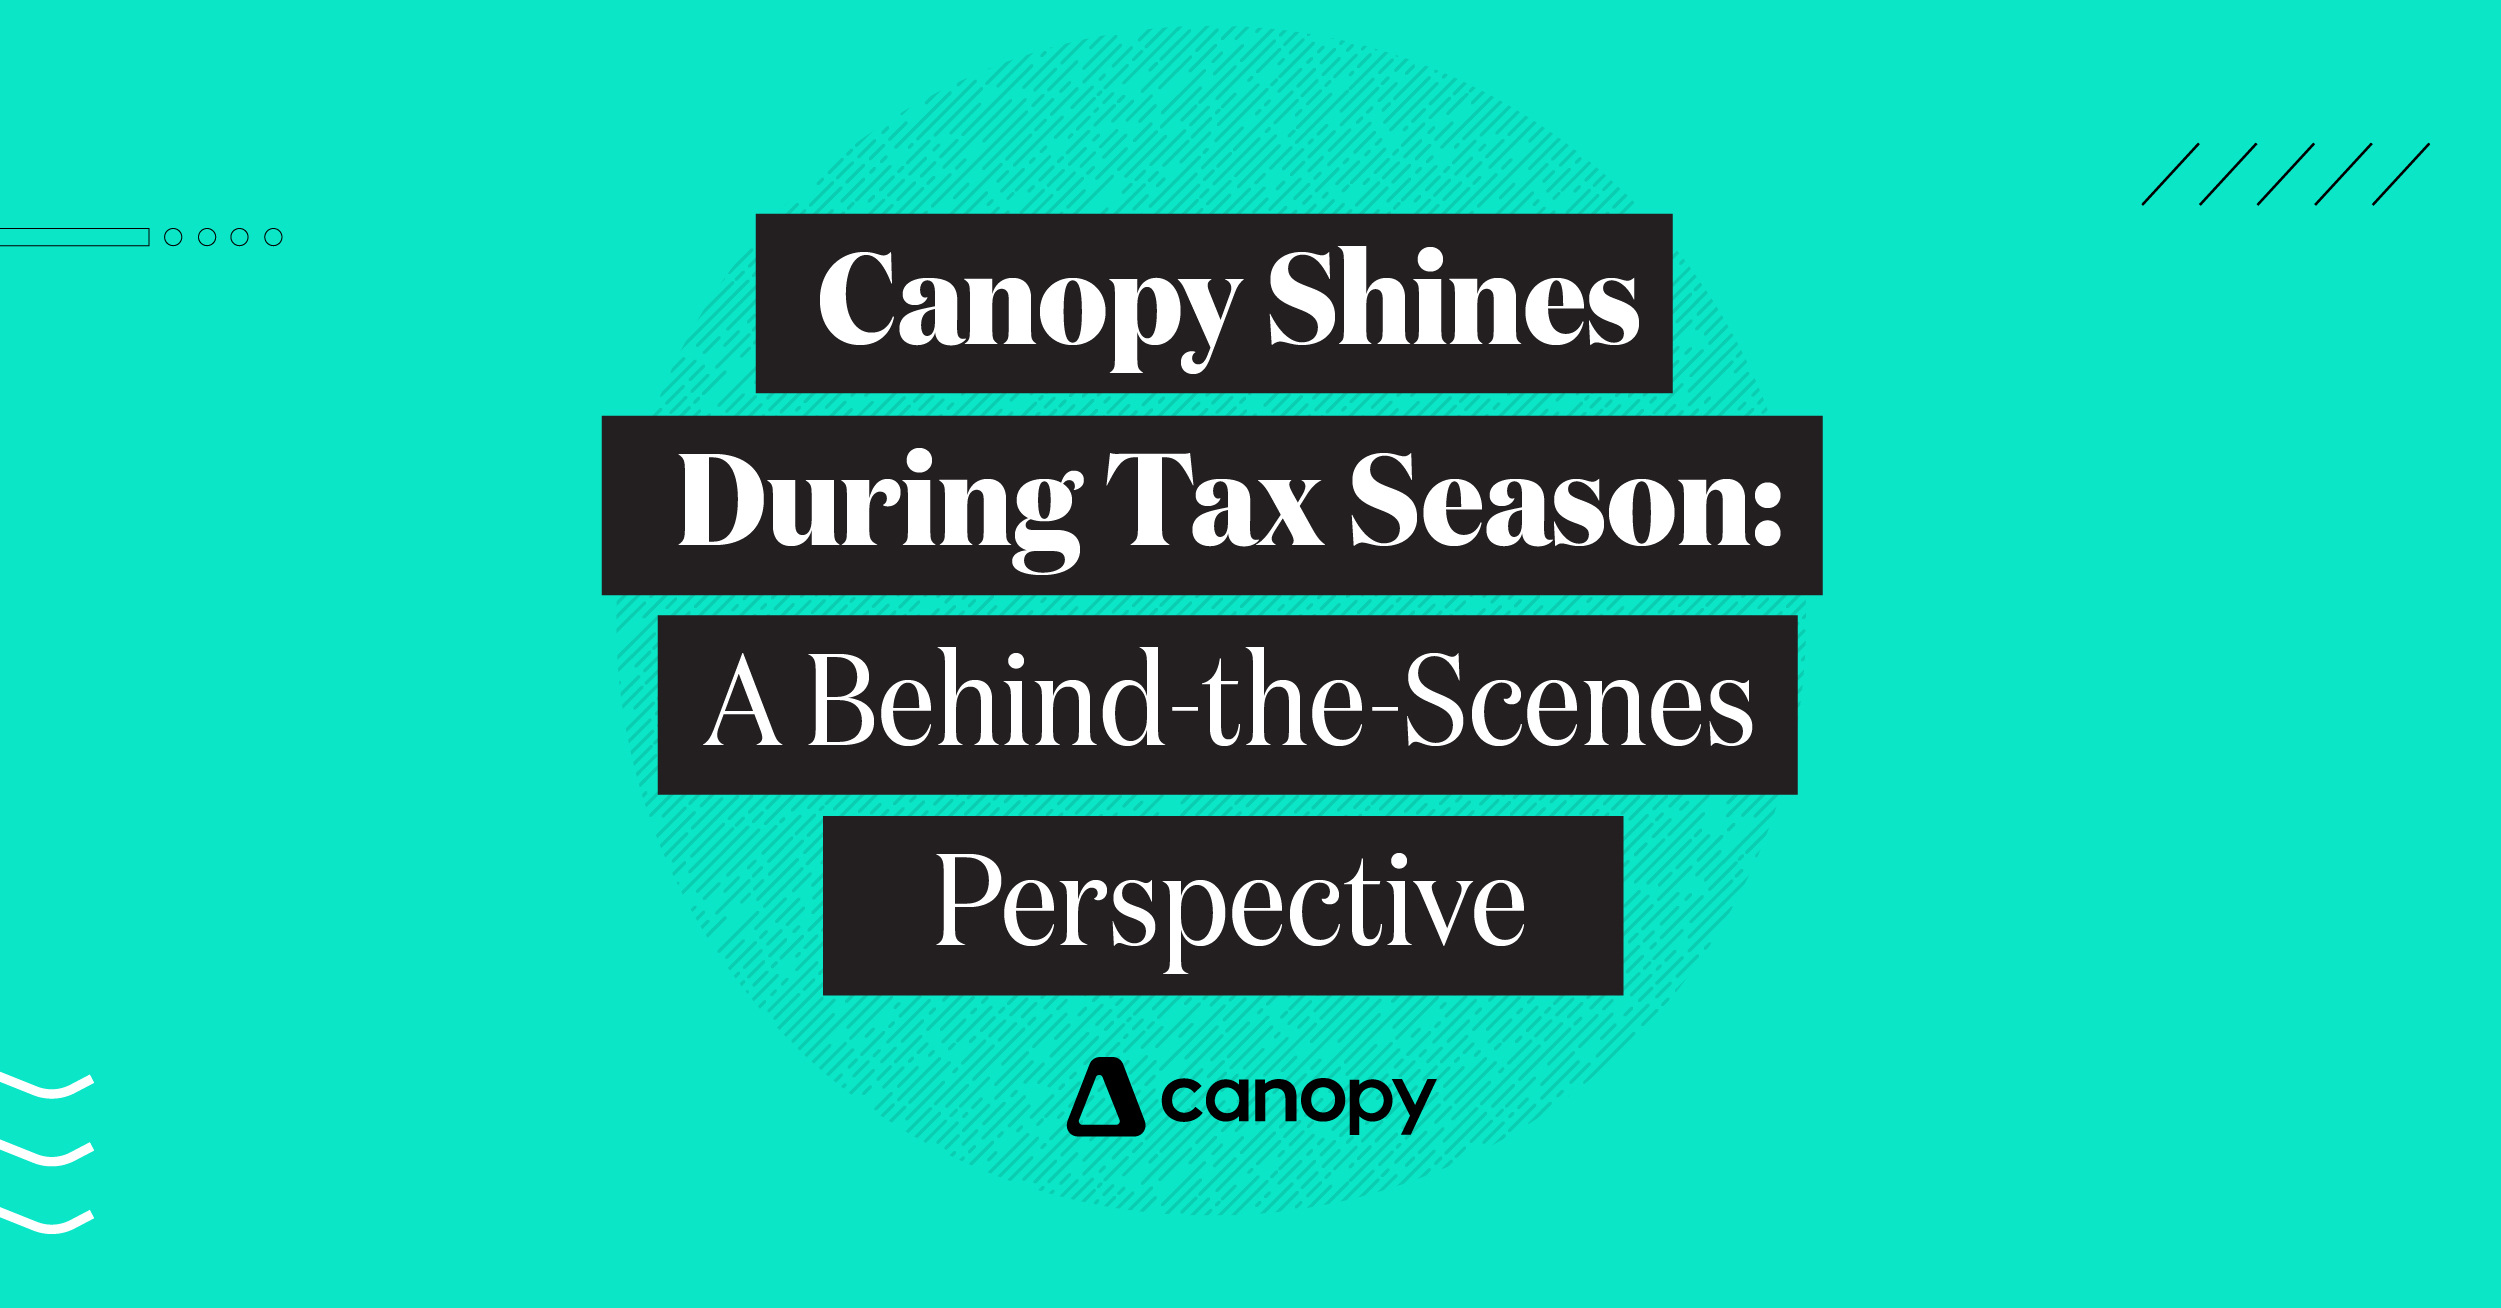 Canopy Shines During Tax Season: A Behind-the-Scenes Perspective